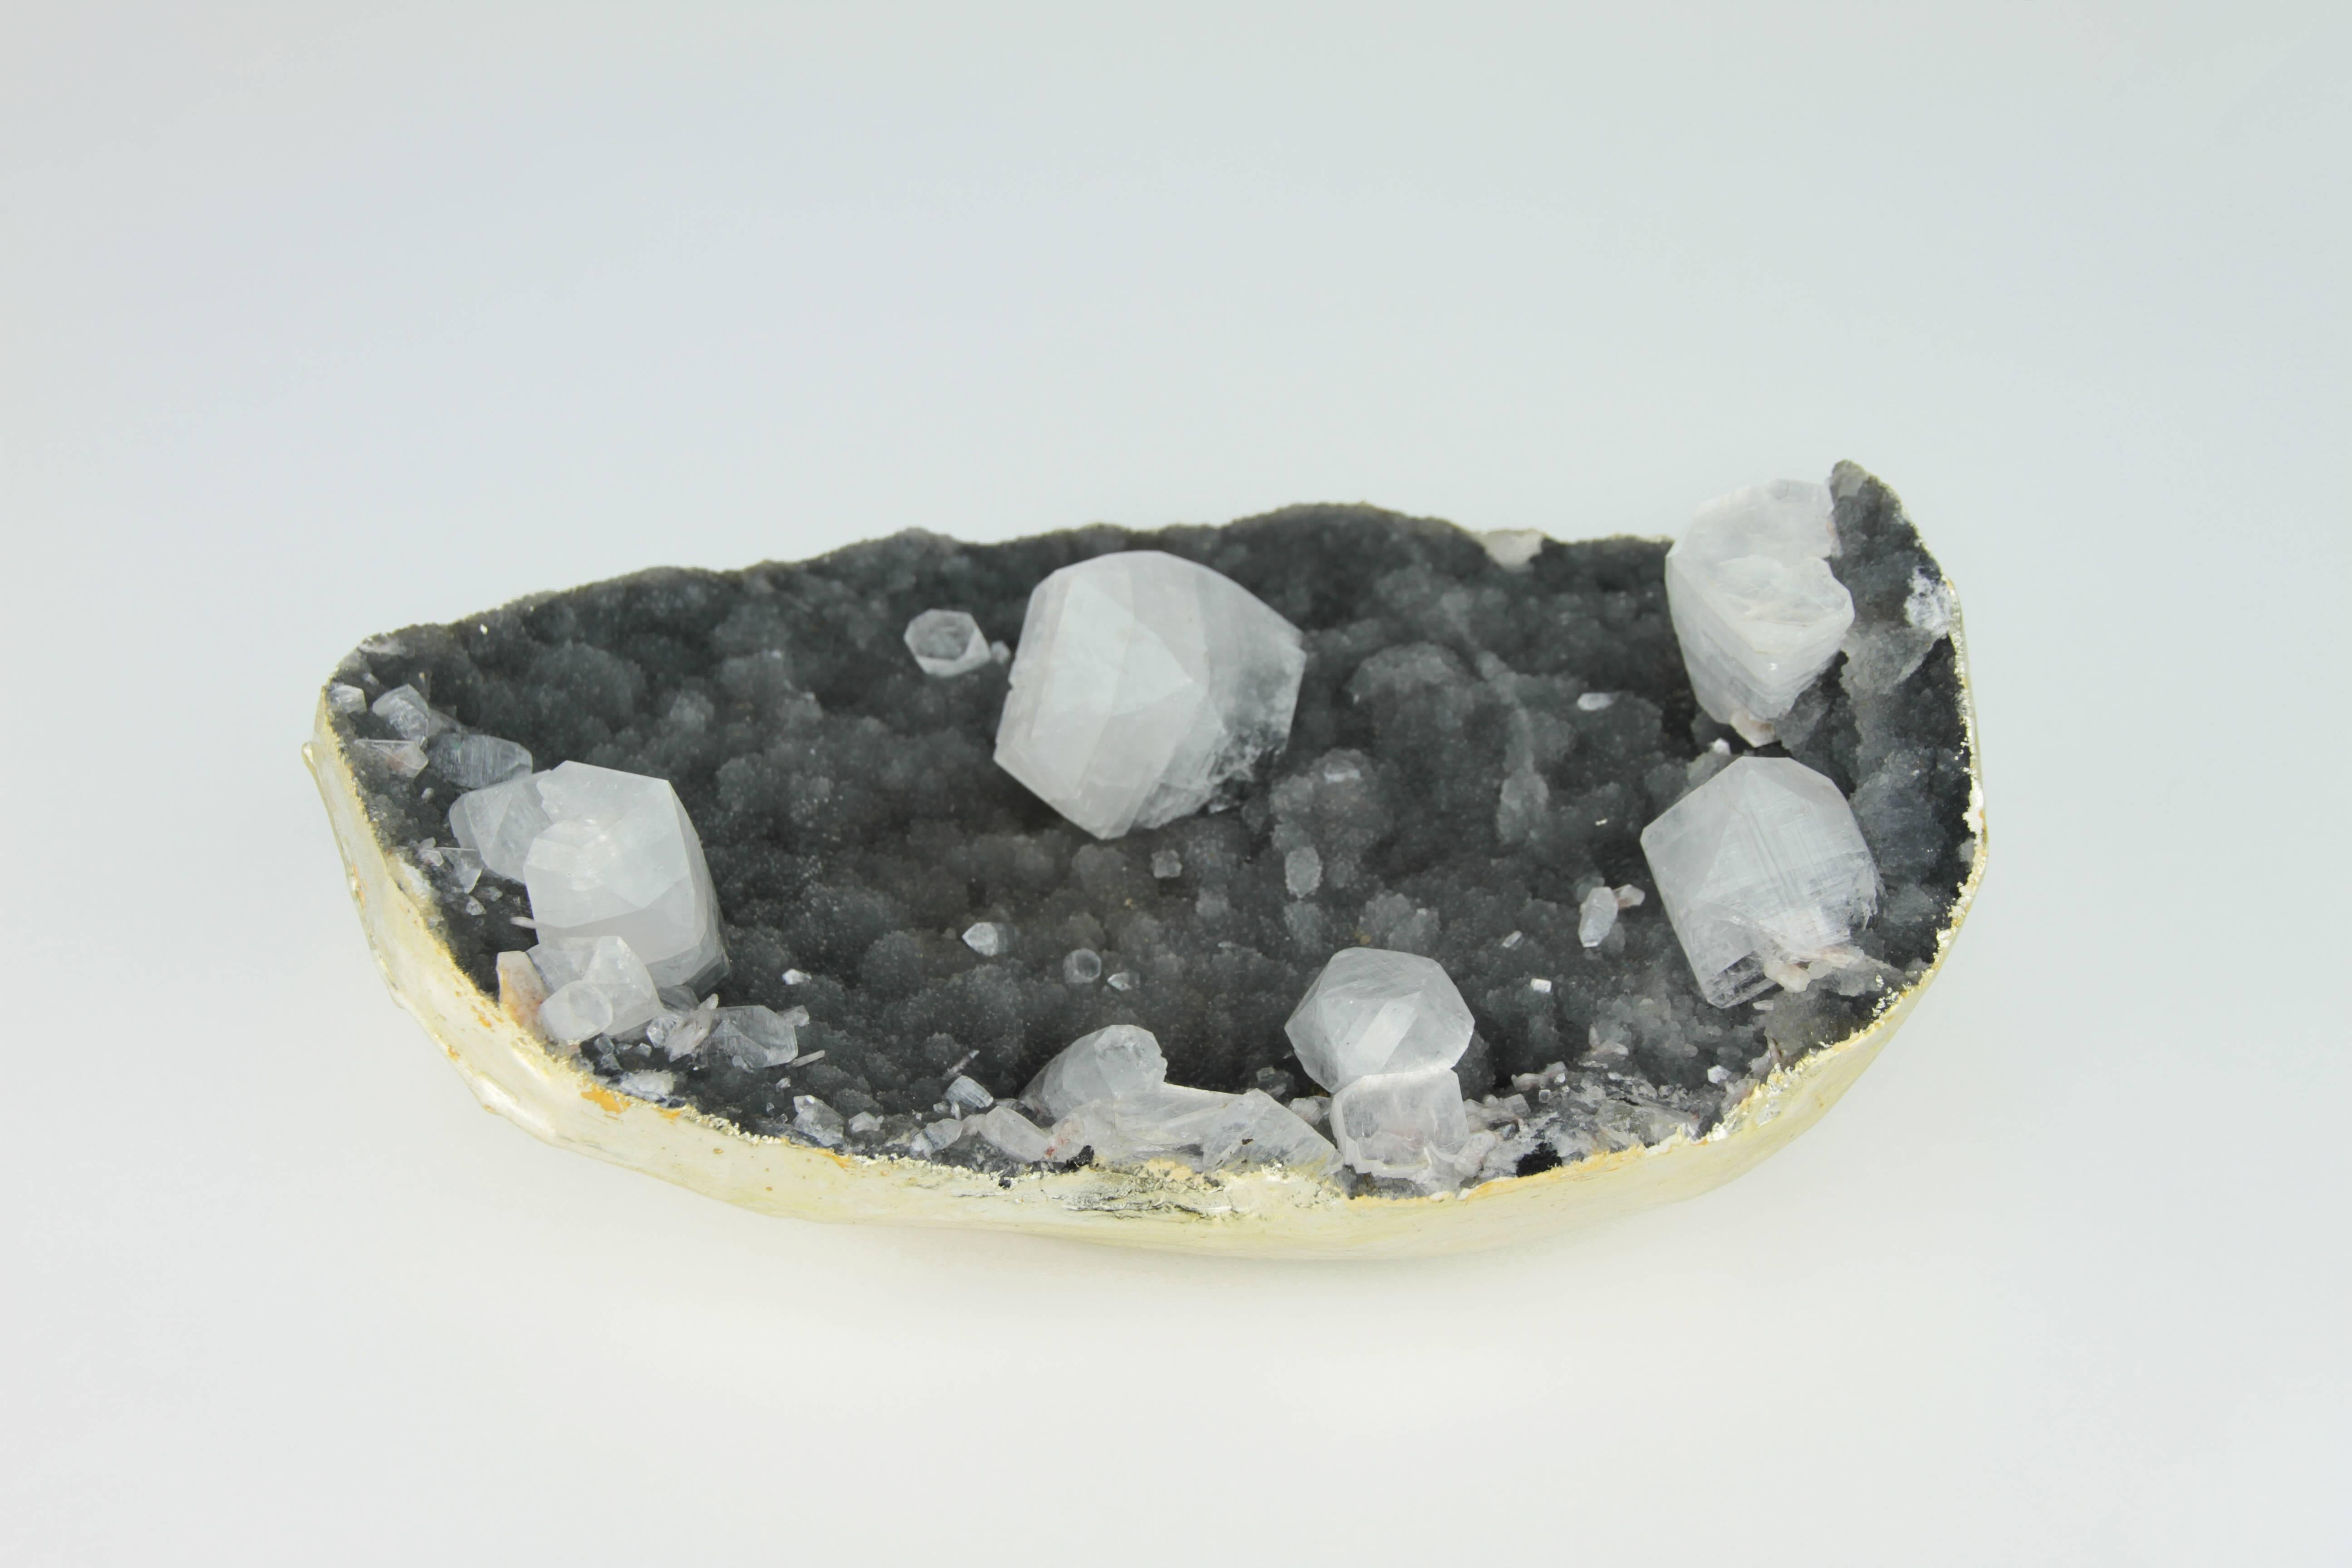 This is an cubist quarts crystal geode in black and clear found in India. It has been meticulously gilded in 22-karat gold. This natural geode will look amazing on a desk, coffee table, or anywhere it can be viewed from all sides. This geode is